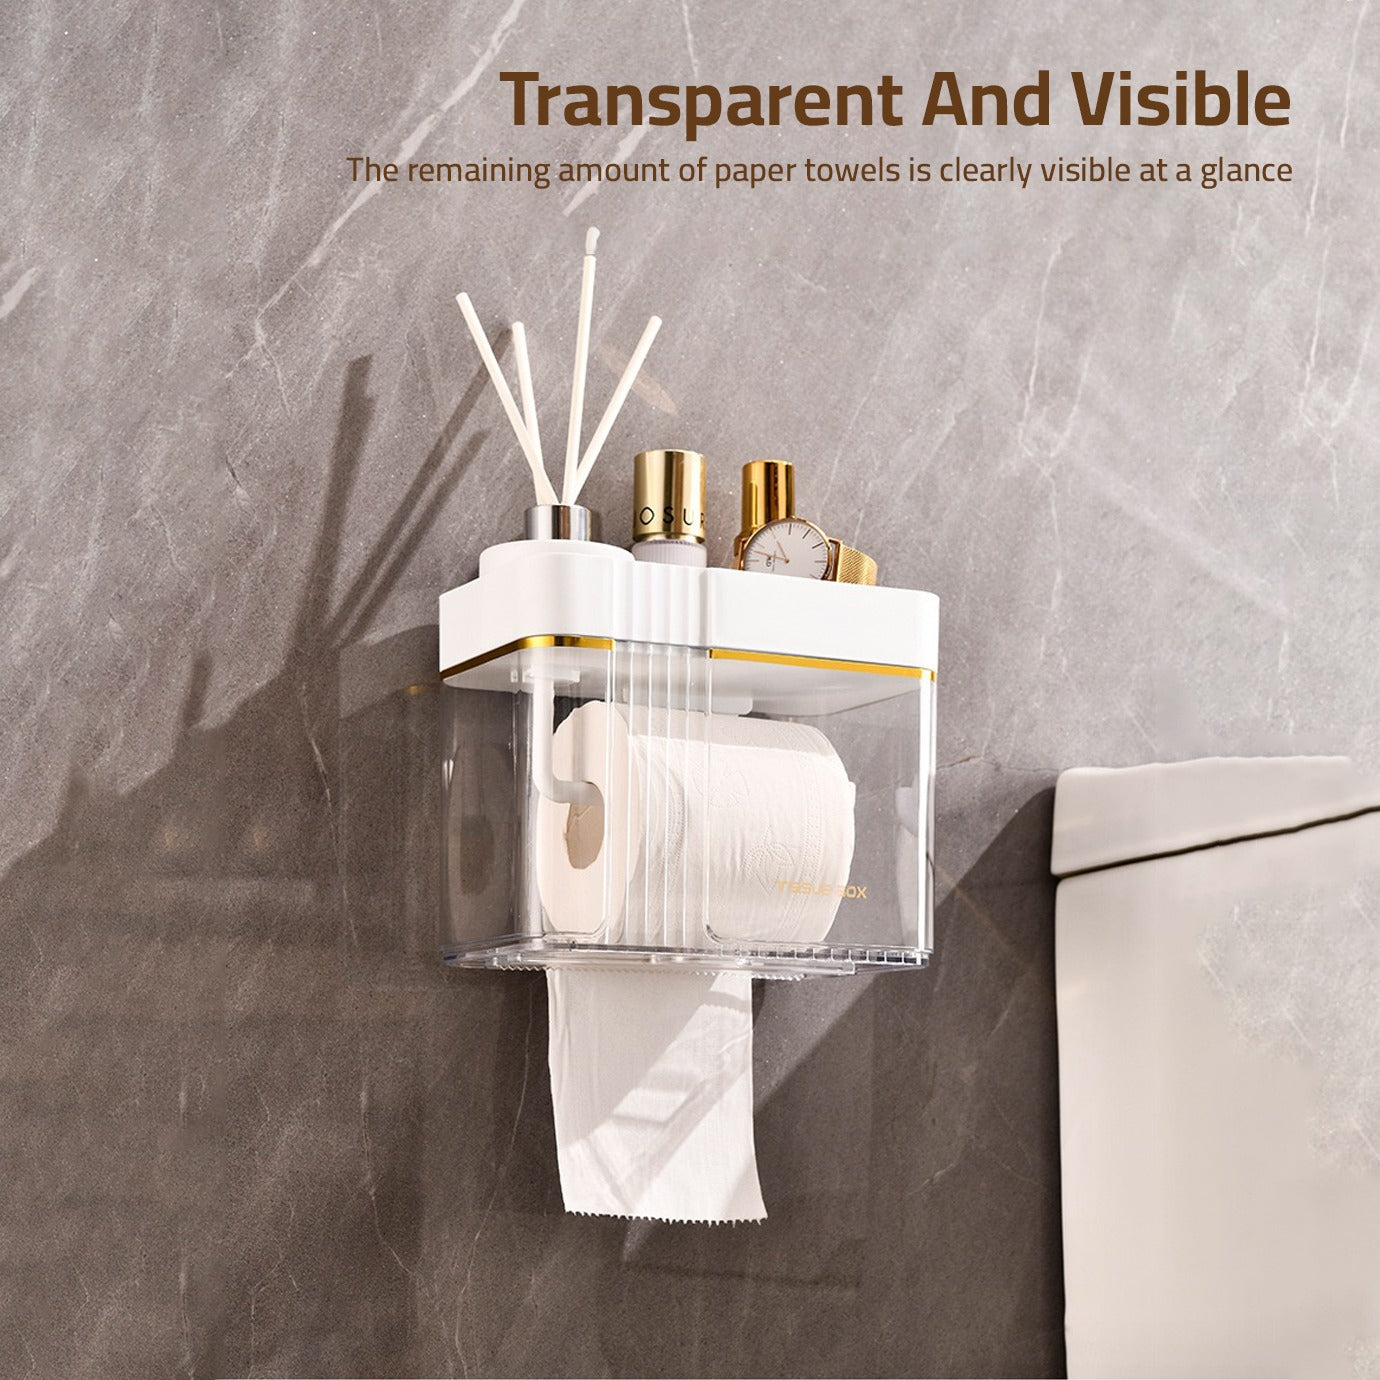 Transparent Wall-Mounted Toilet Paper Holder with Storage Shelf with tissue roll,watch and cosmetics items mounted on a bathroom wall